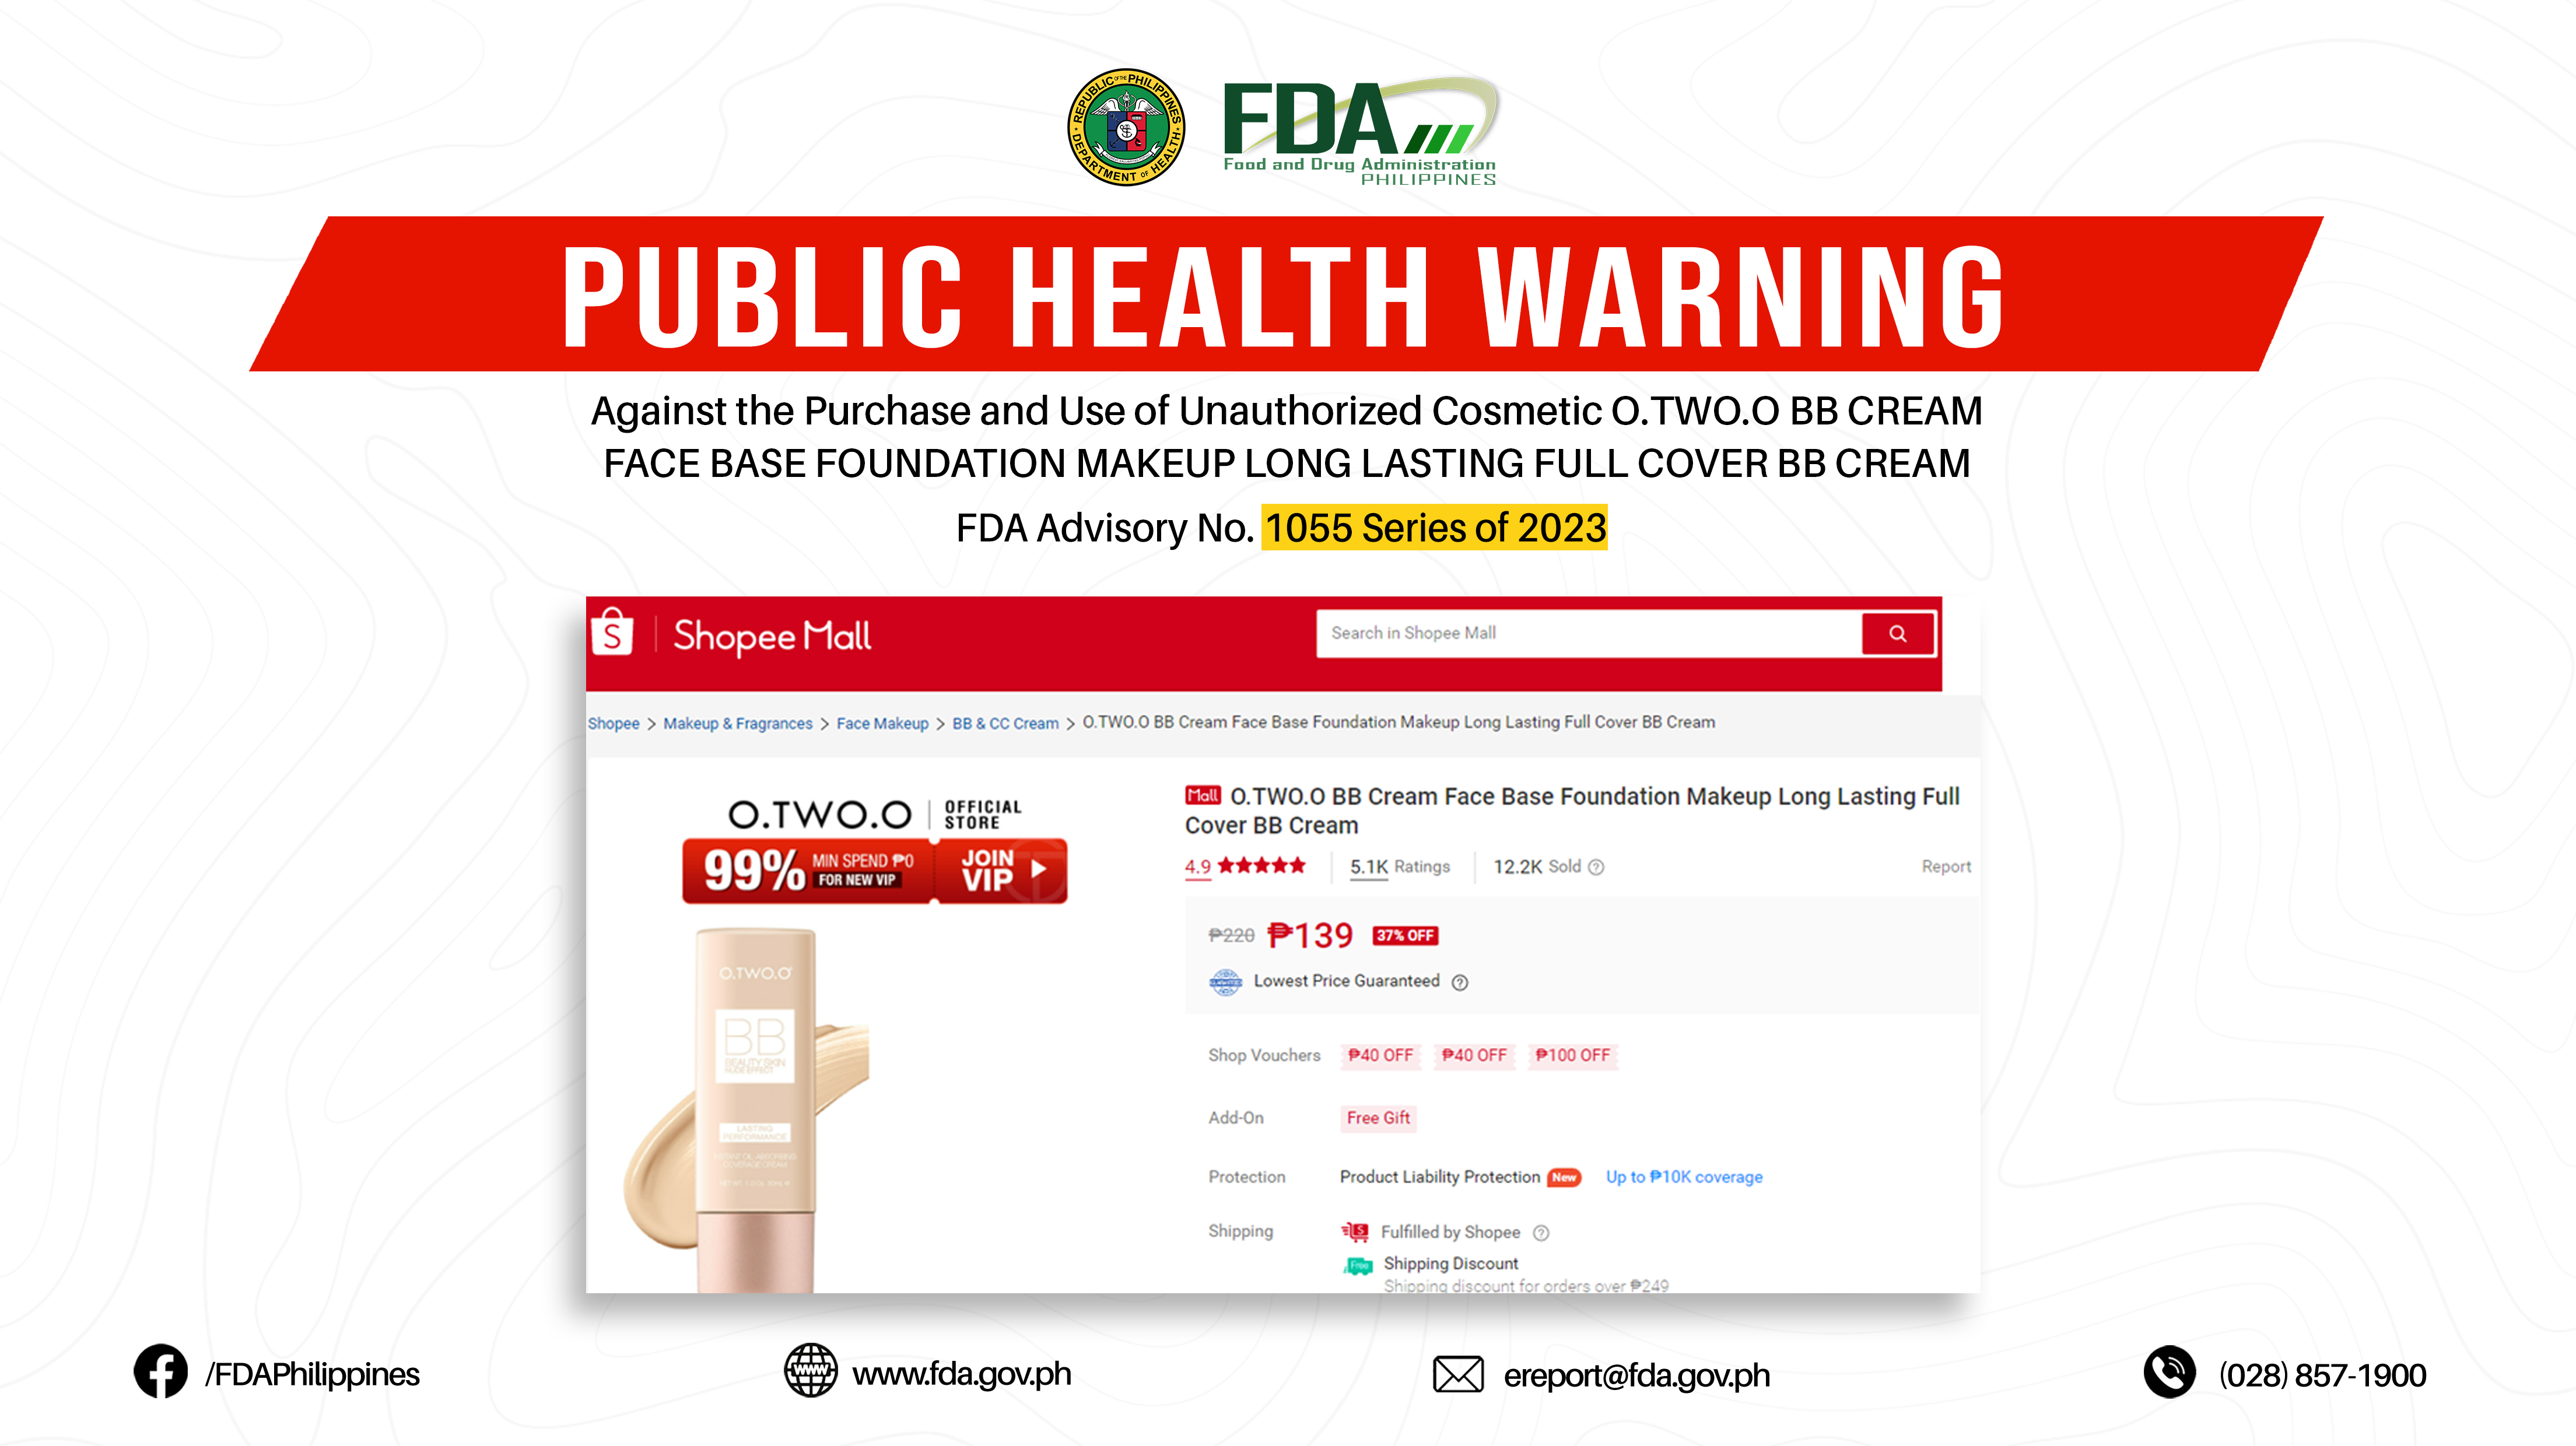 FDA Advisory No.2023-1055 || Public Health Warning Against the Purchase and Use of Unauthorized Cosmetic O.TWO.O BB CREAM FACE BASE FOUNDATION MAKEUP LONG LASTING FULL COVER BB CREAM